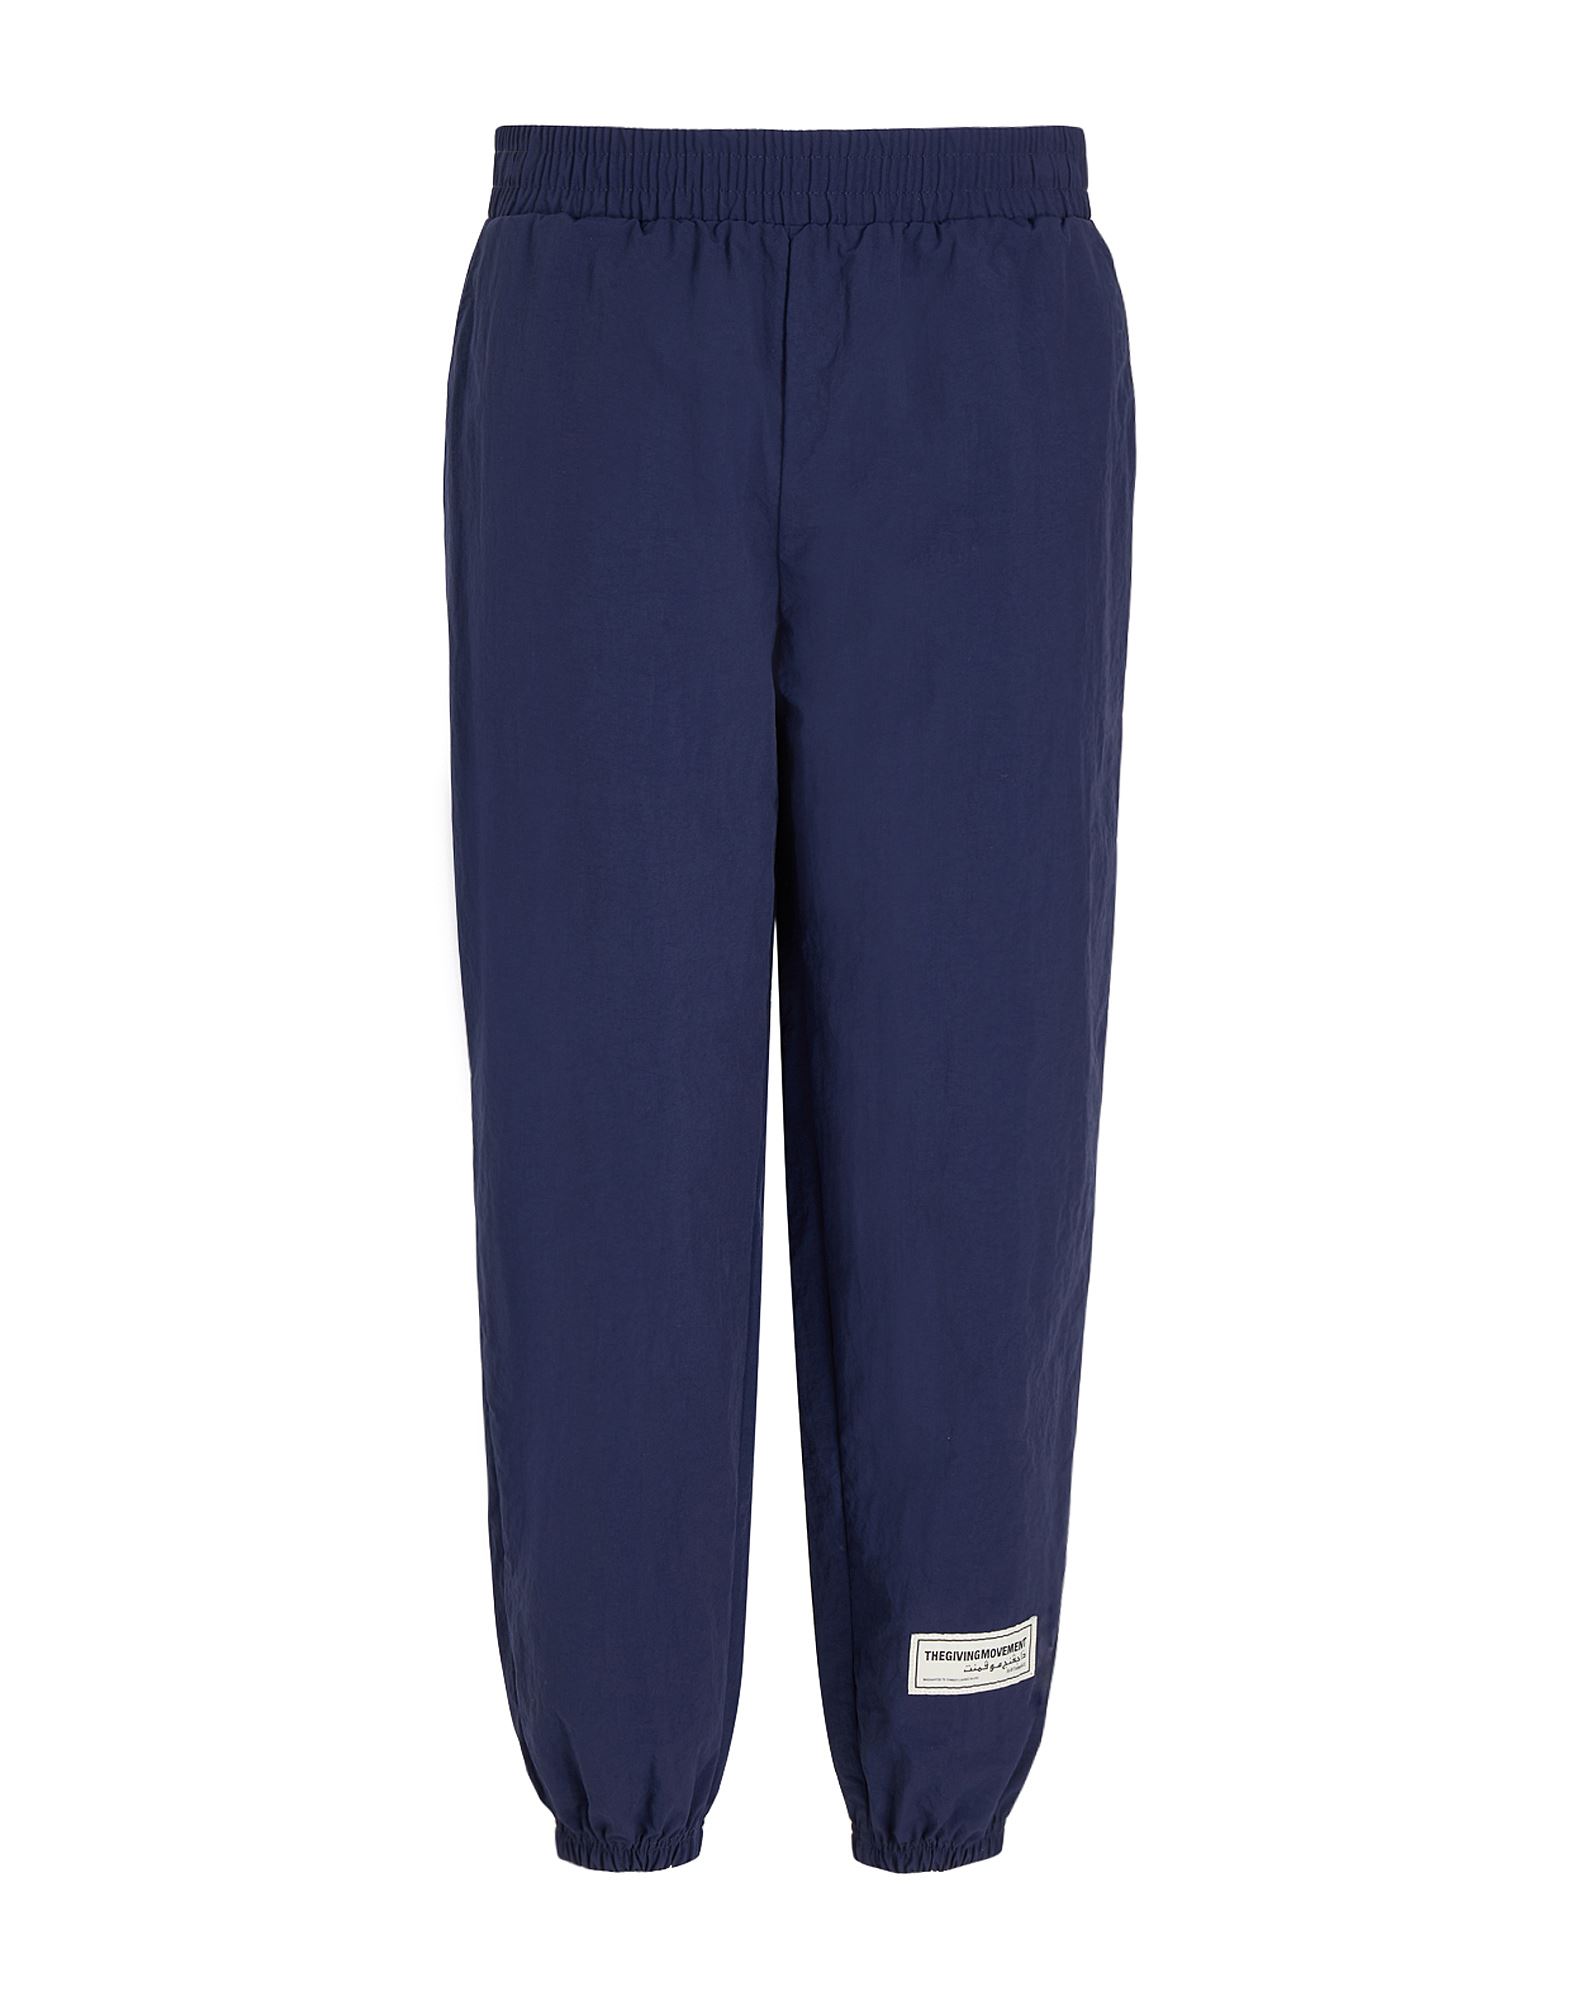 The Giving Movement X Yoox Pants In Blue